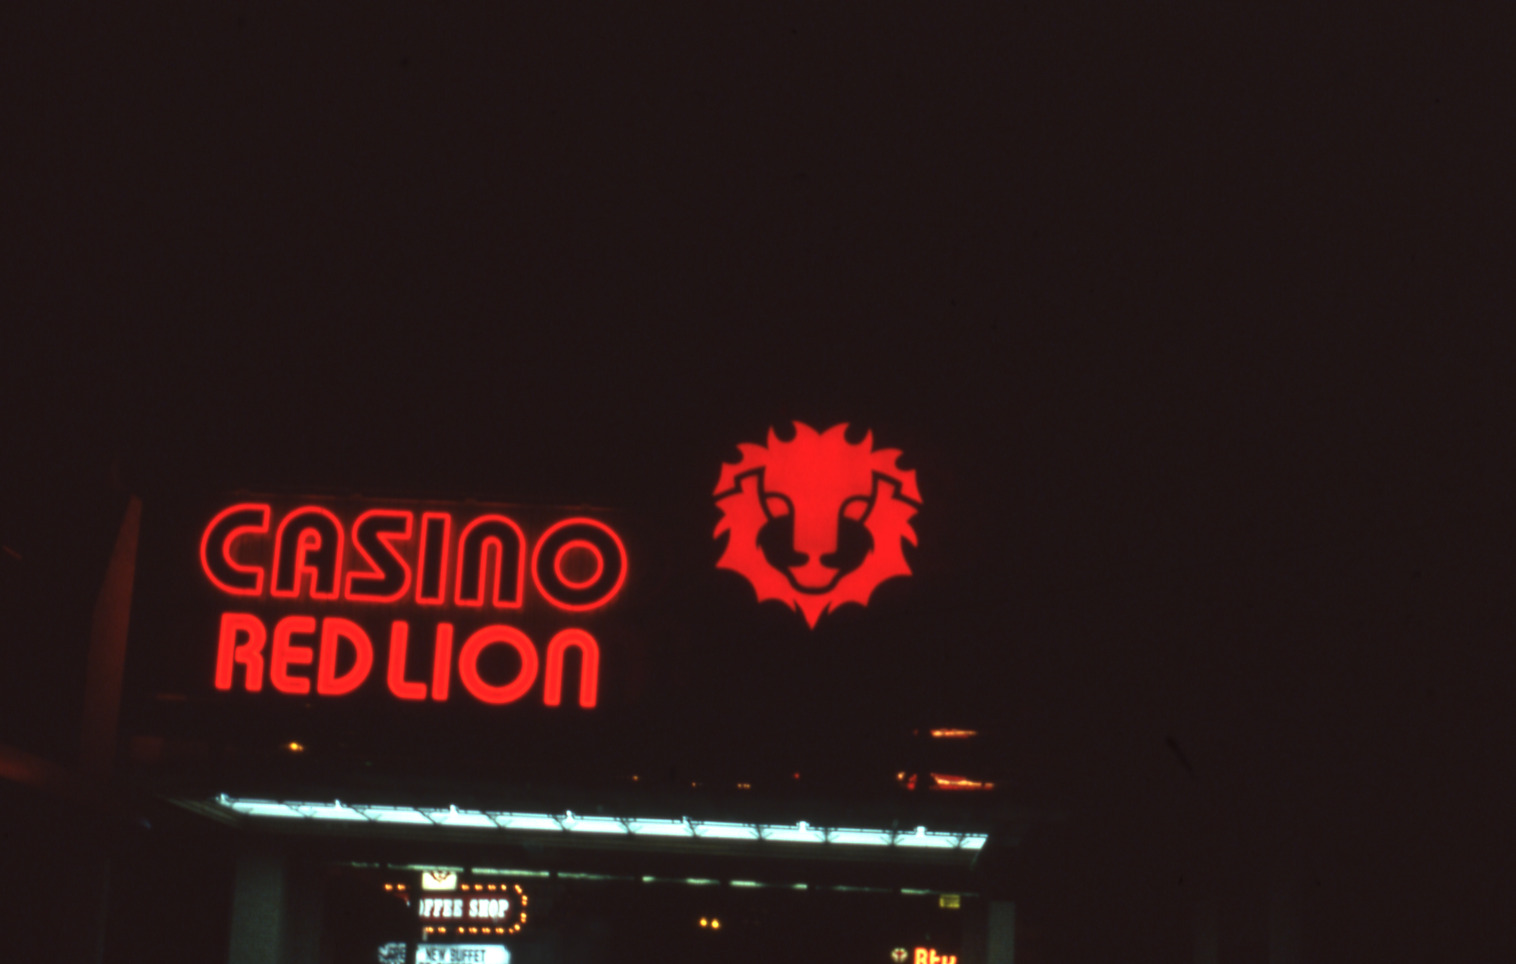 Red Lion Casino lettering and logo sign, Elko, Nevada: photographic print